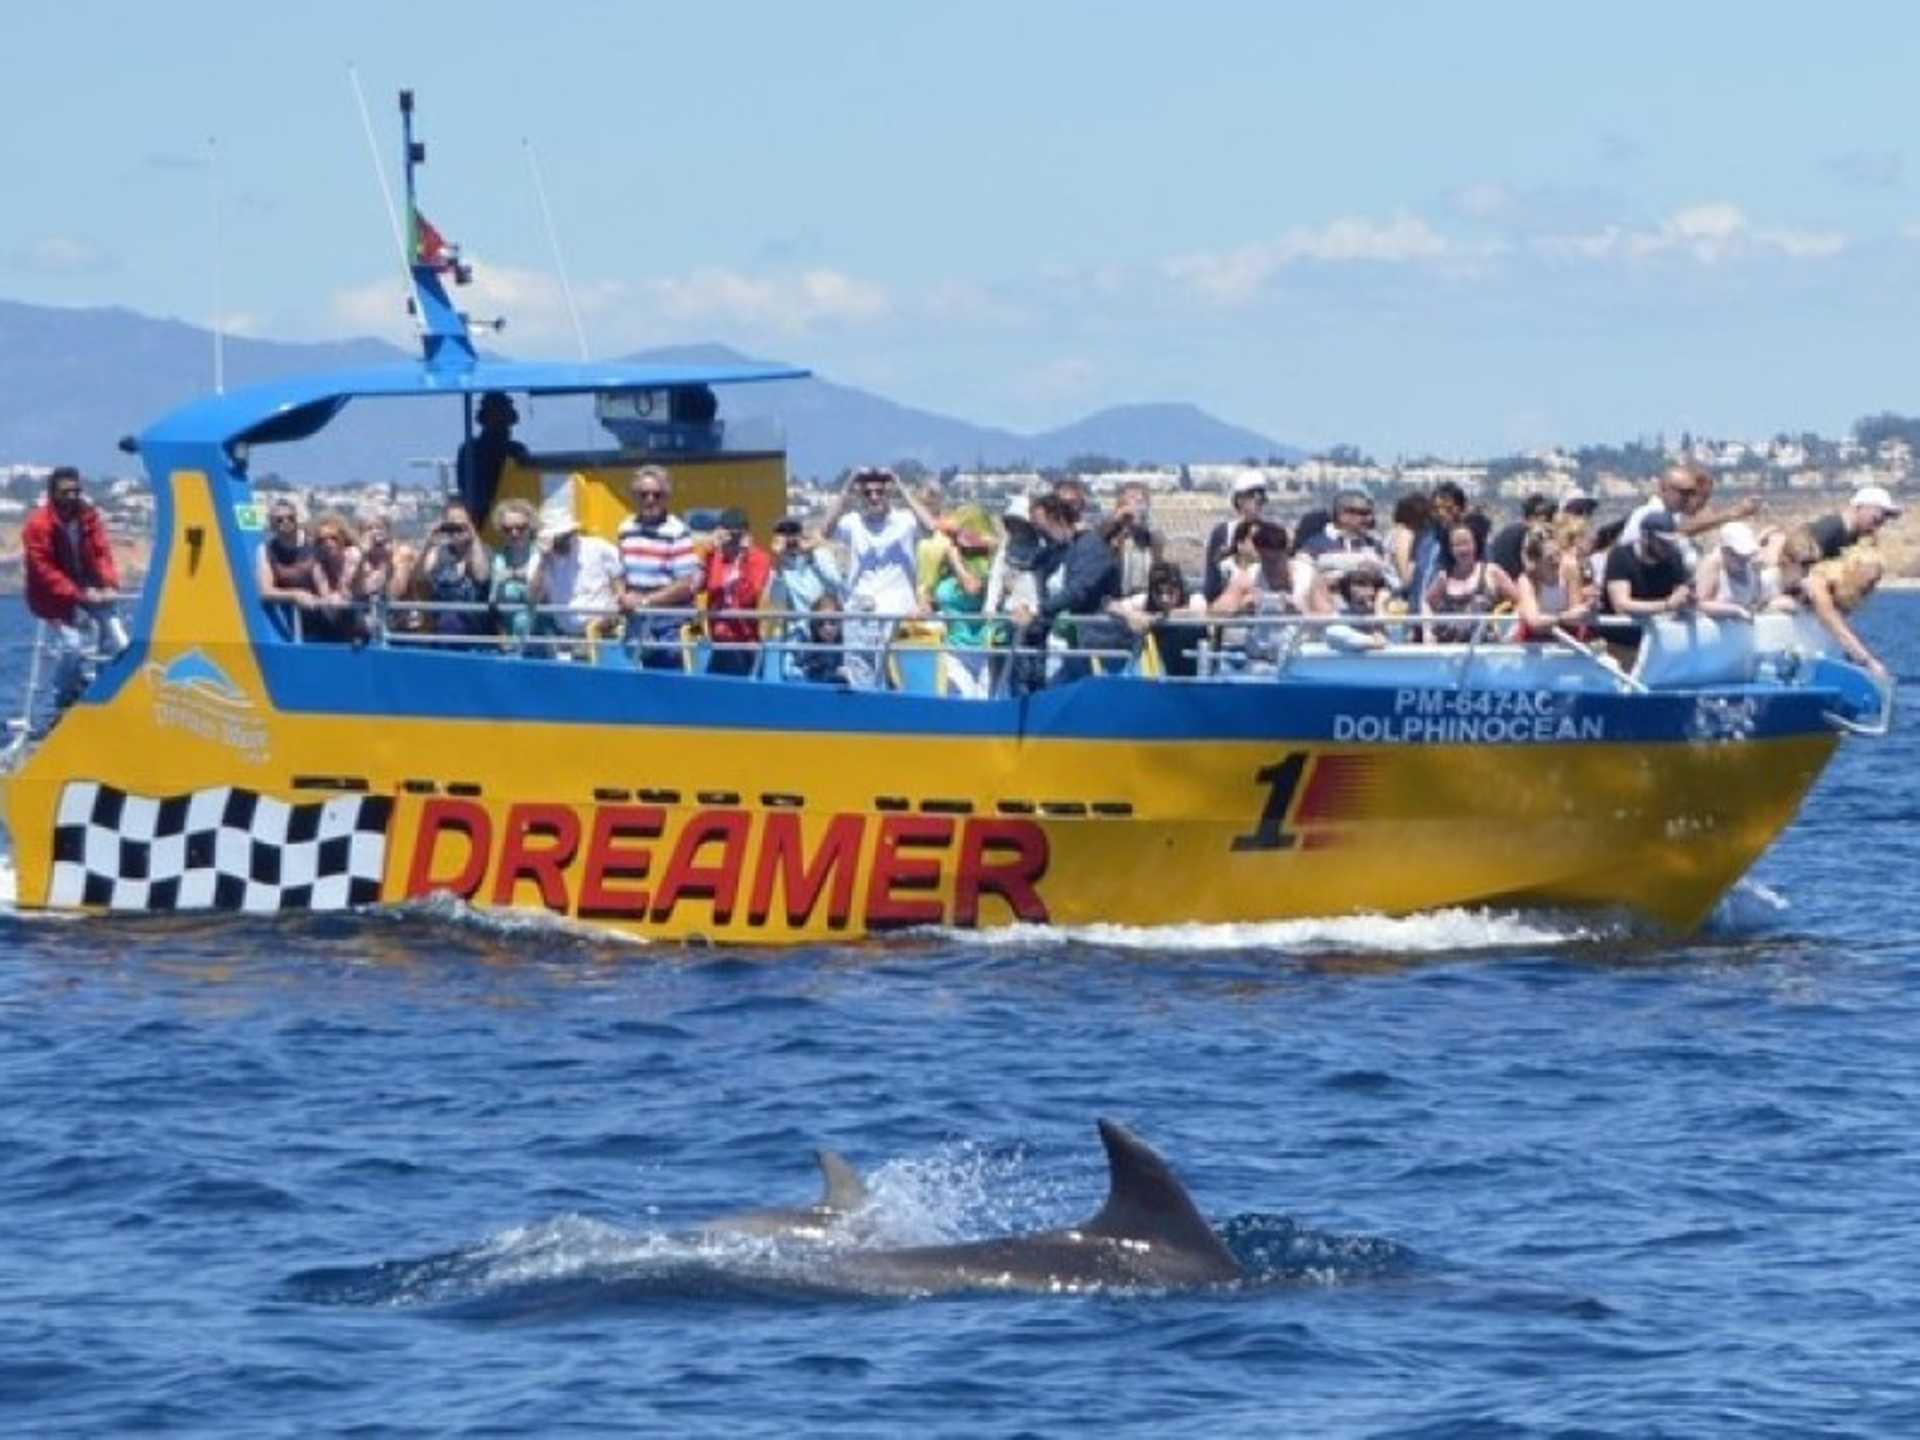 Algarve Caves & Dolphin Watching Cruise on Dreamer